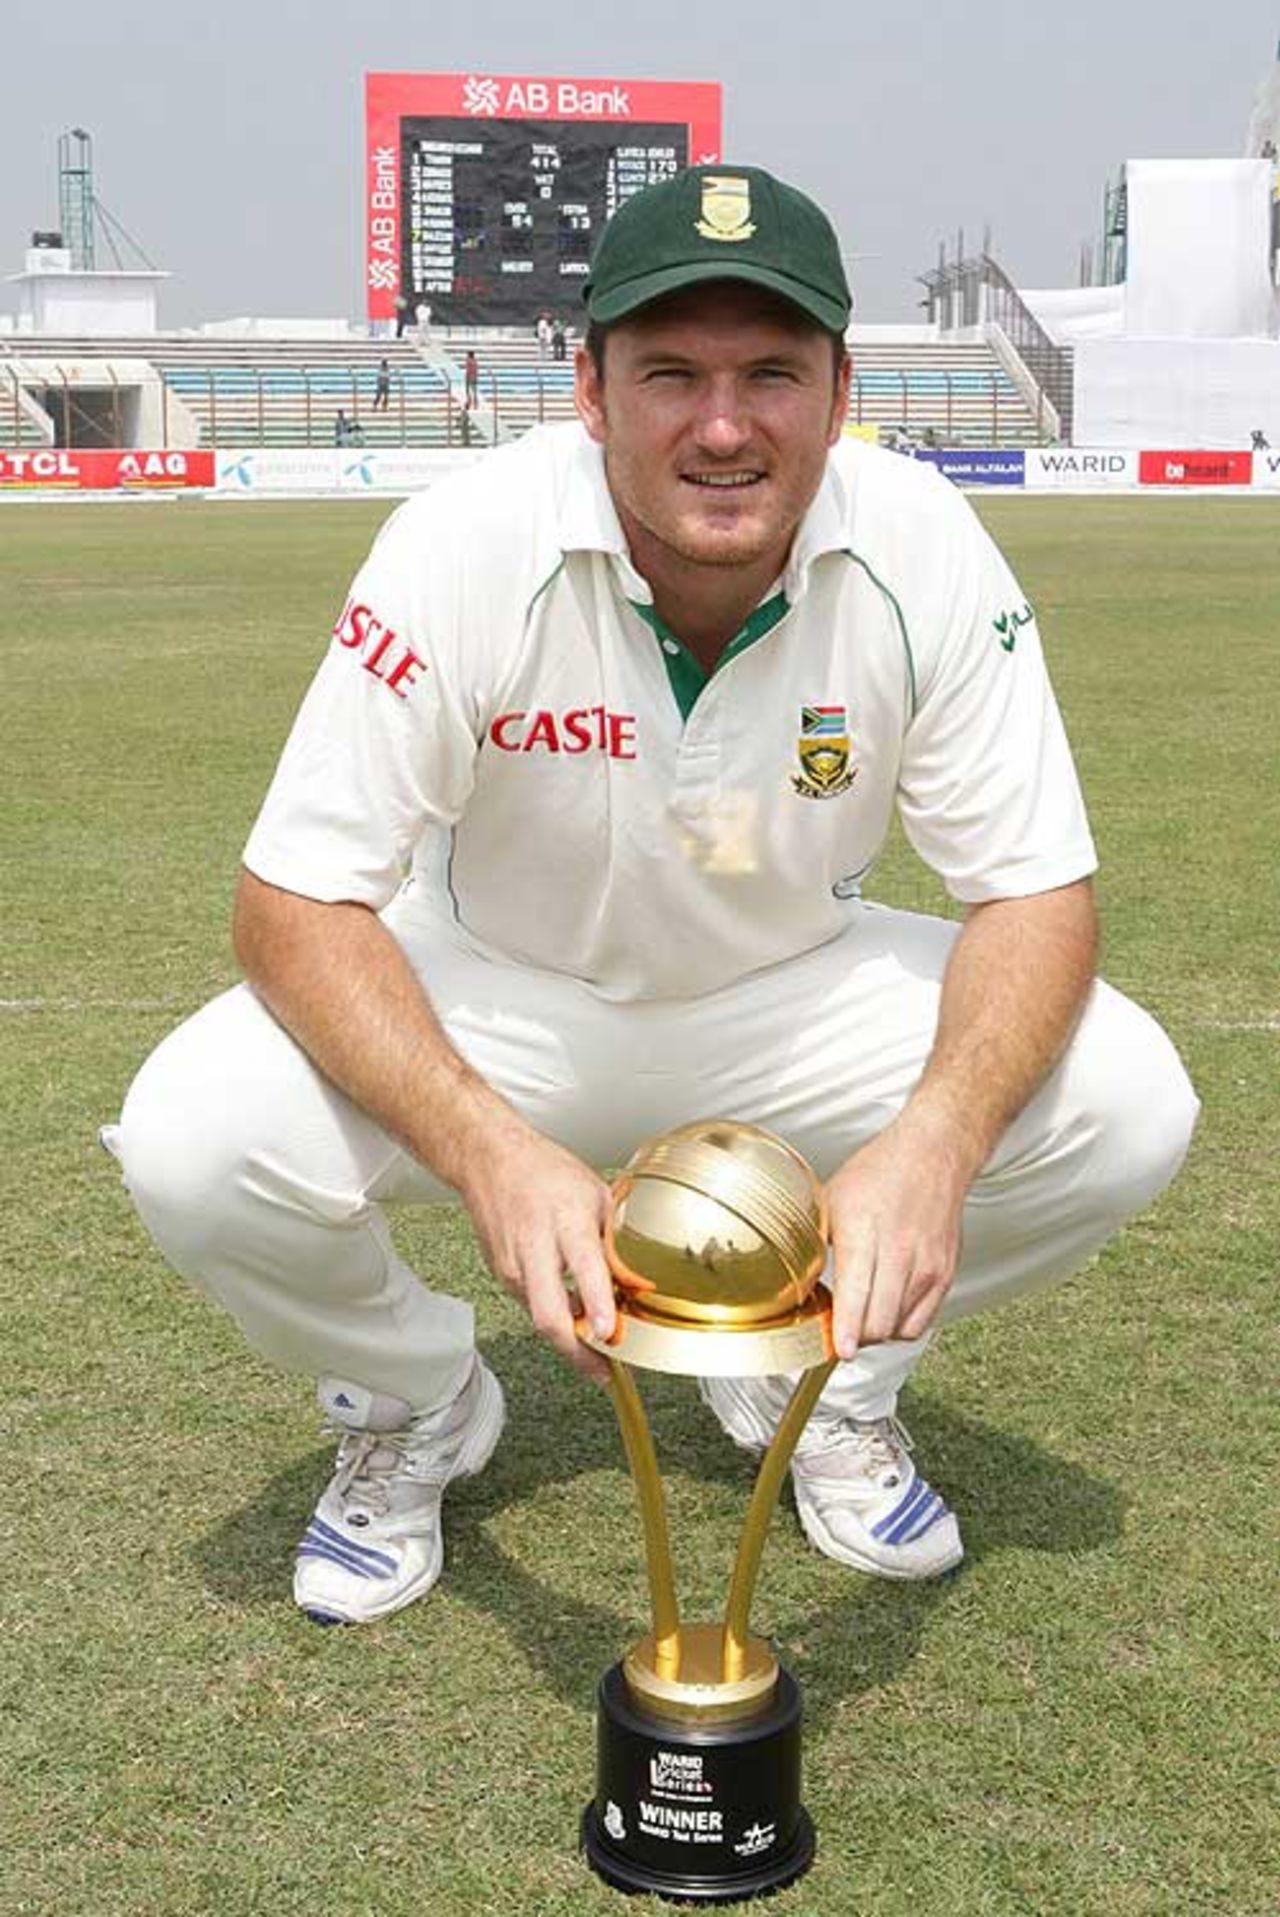 Graeme Smith with the series trophy after South Africa won by an innings and 205 runs, Bangladesh v South Africa, 2nd Test, Chittagong, 4th day, March 3, 2008 